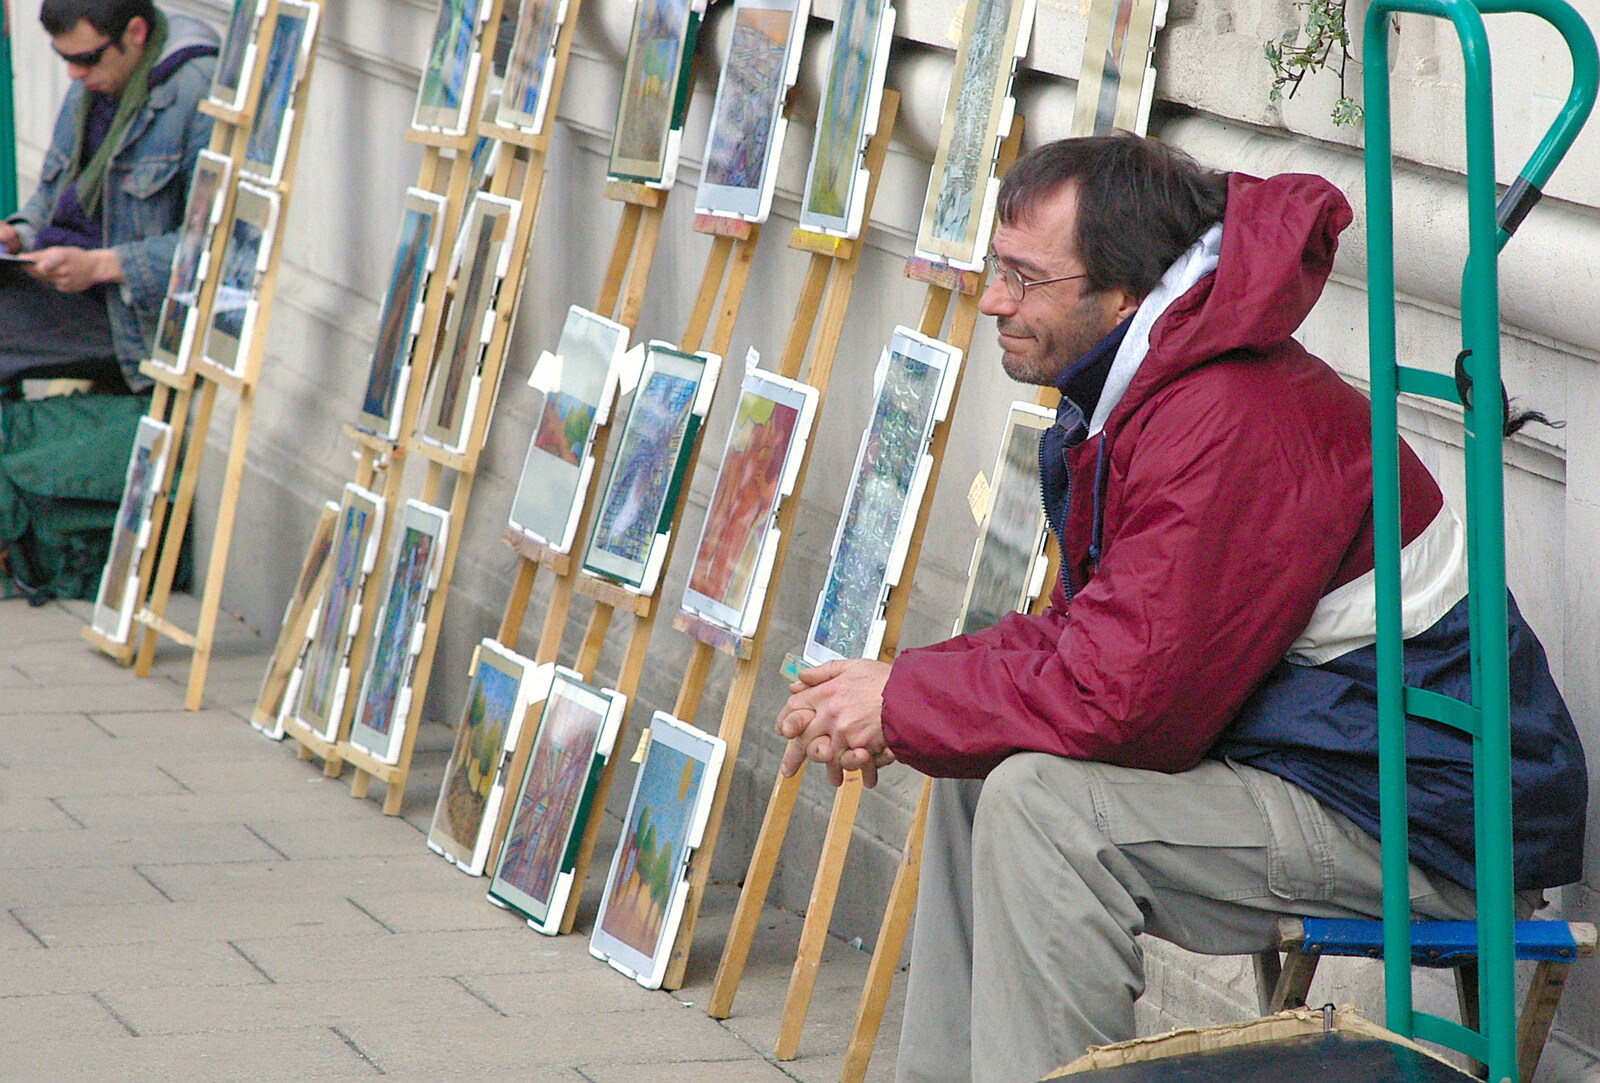 Outside Lloyds Bank, a painter waits for a sale from Norwich Market, the BSCC at Occold, and Diss Publishing - 10th April 2005